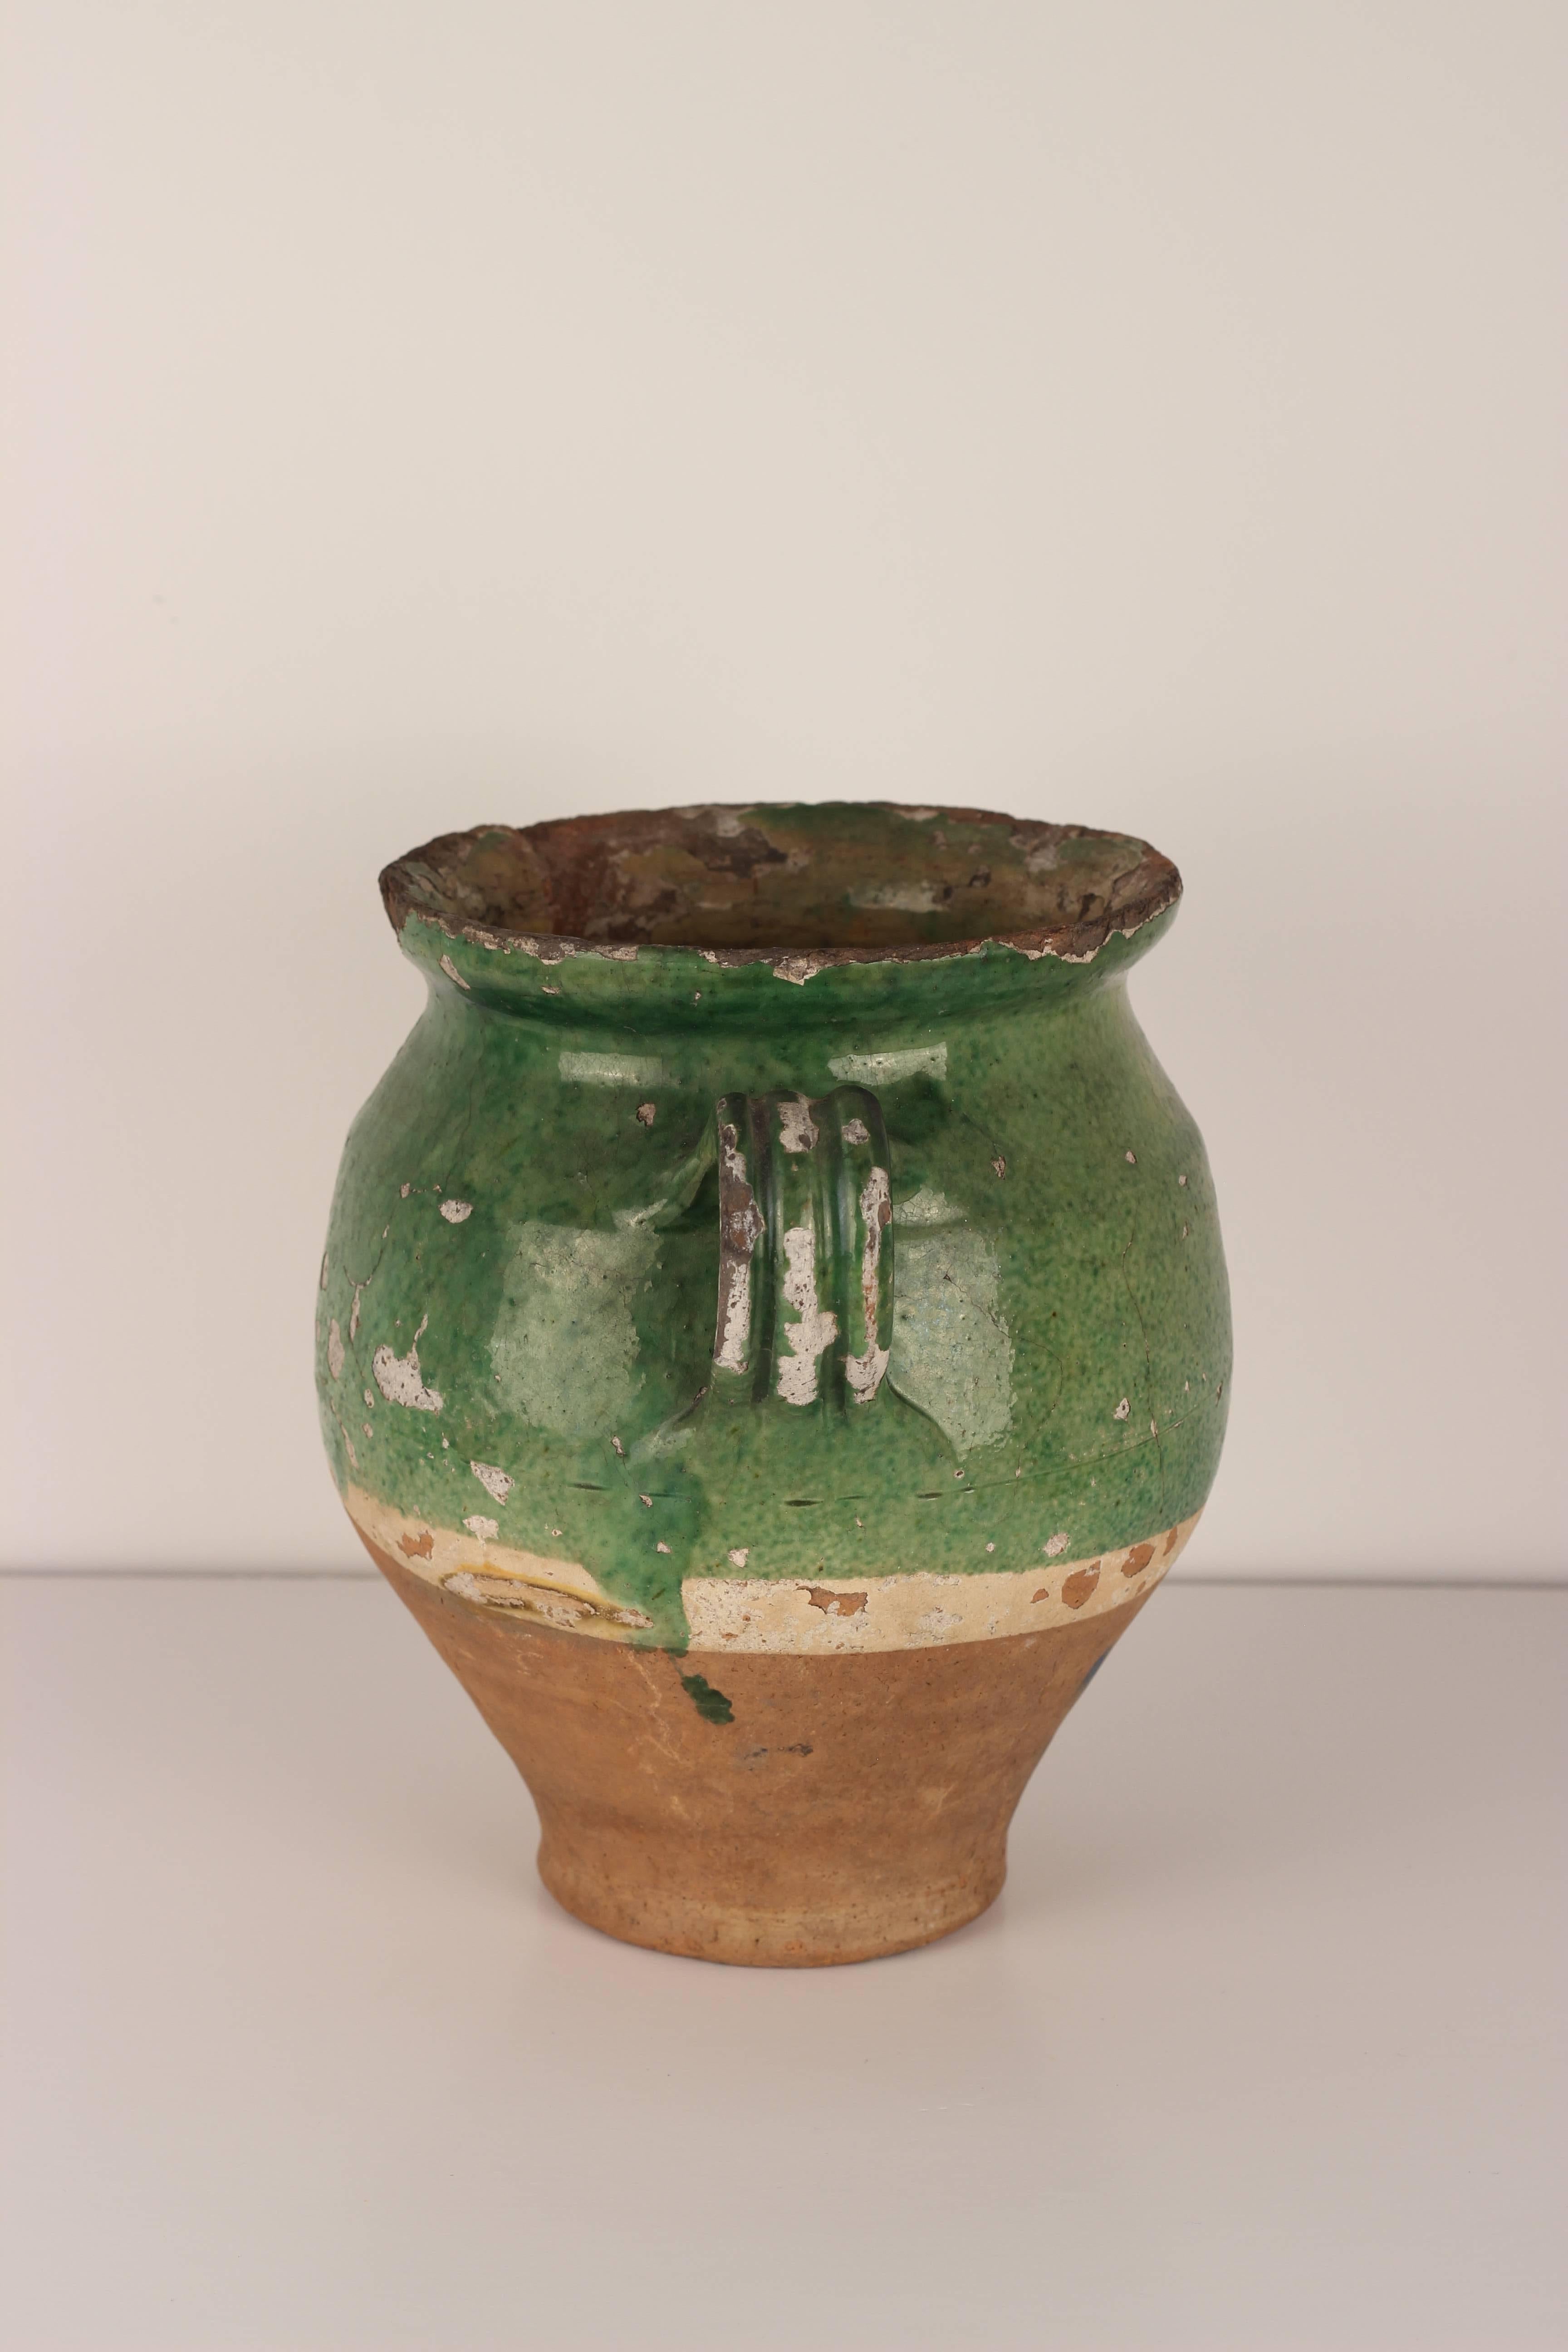 French Rare Green Confit Pot from the South of France, 19th Century